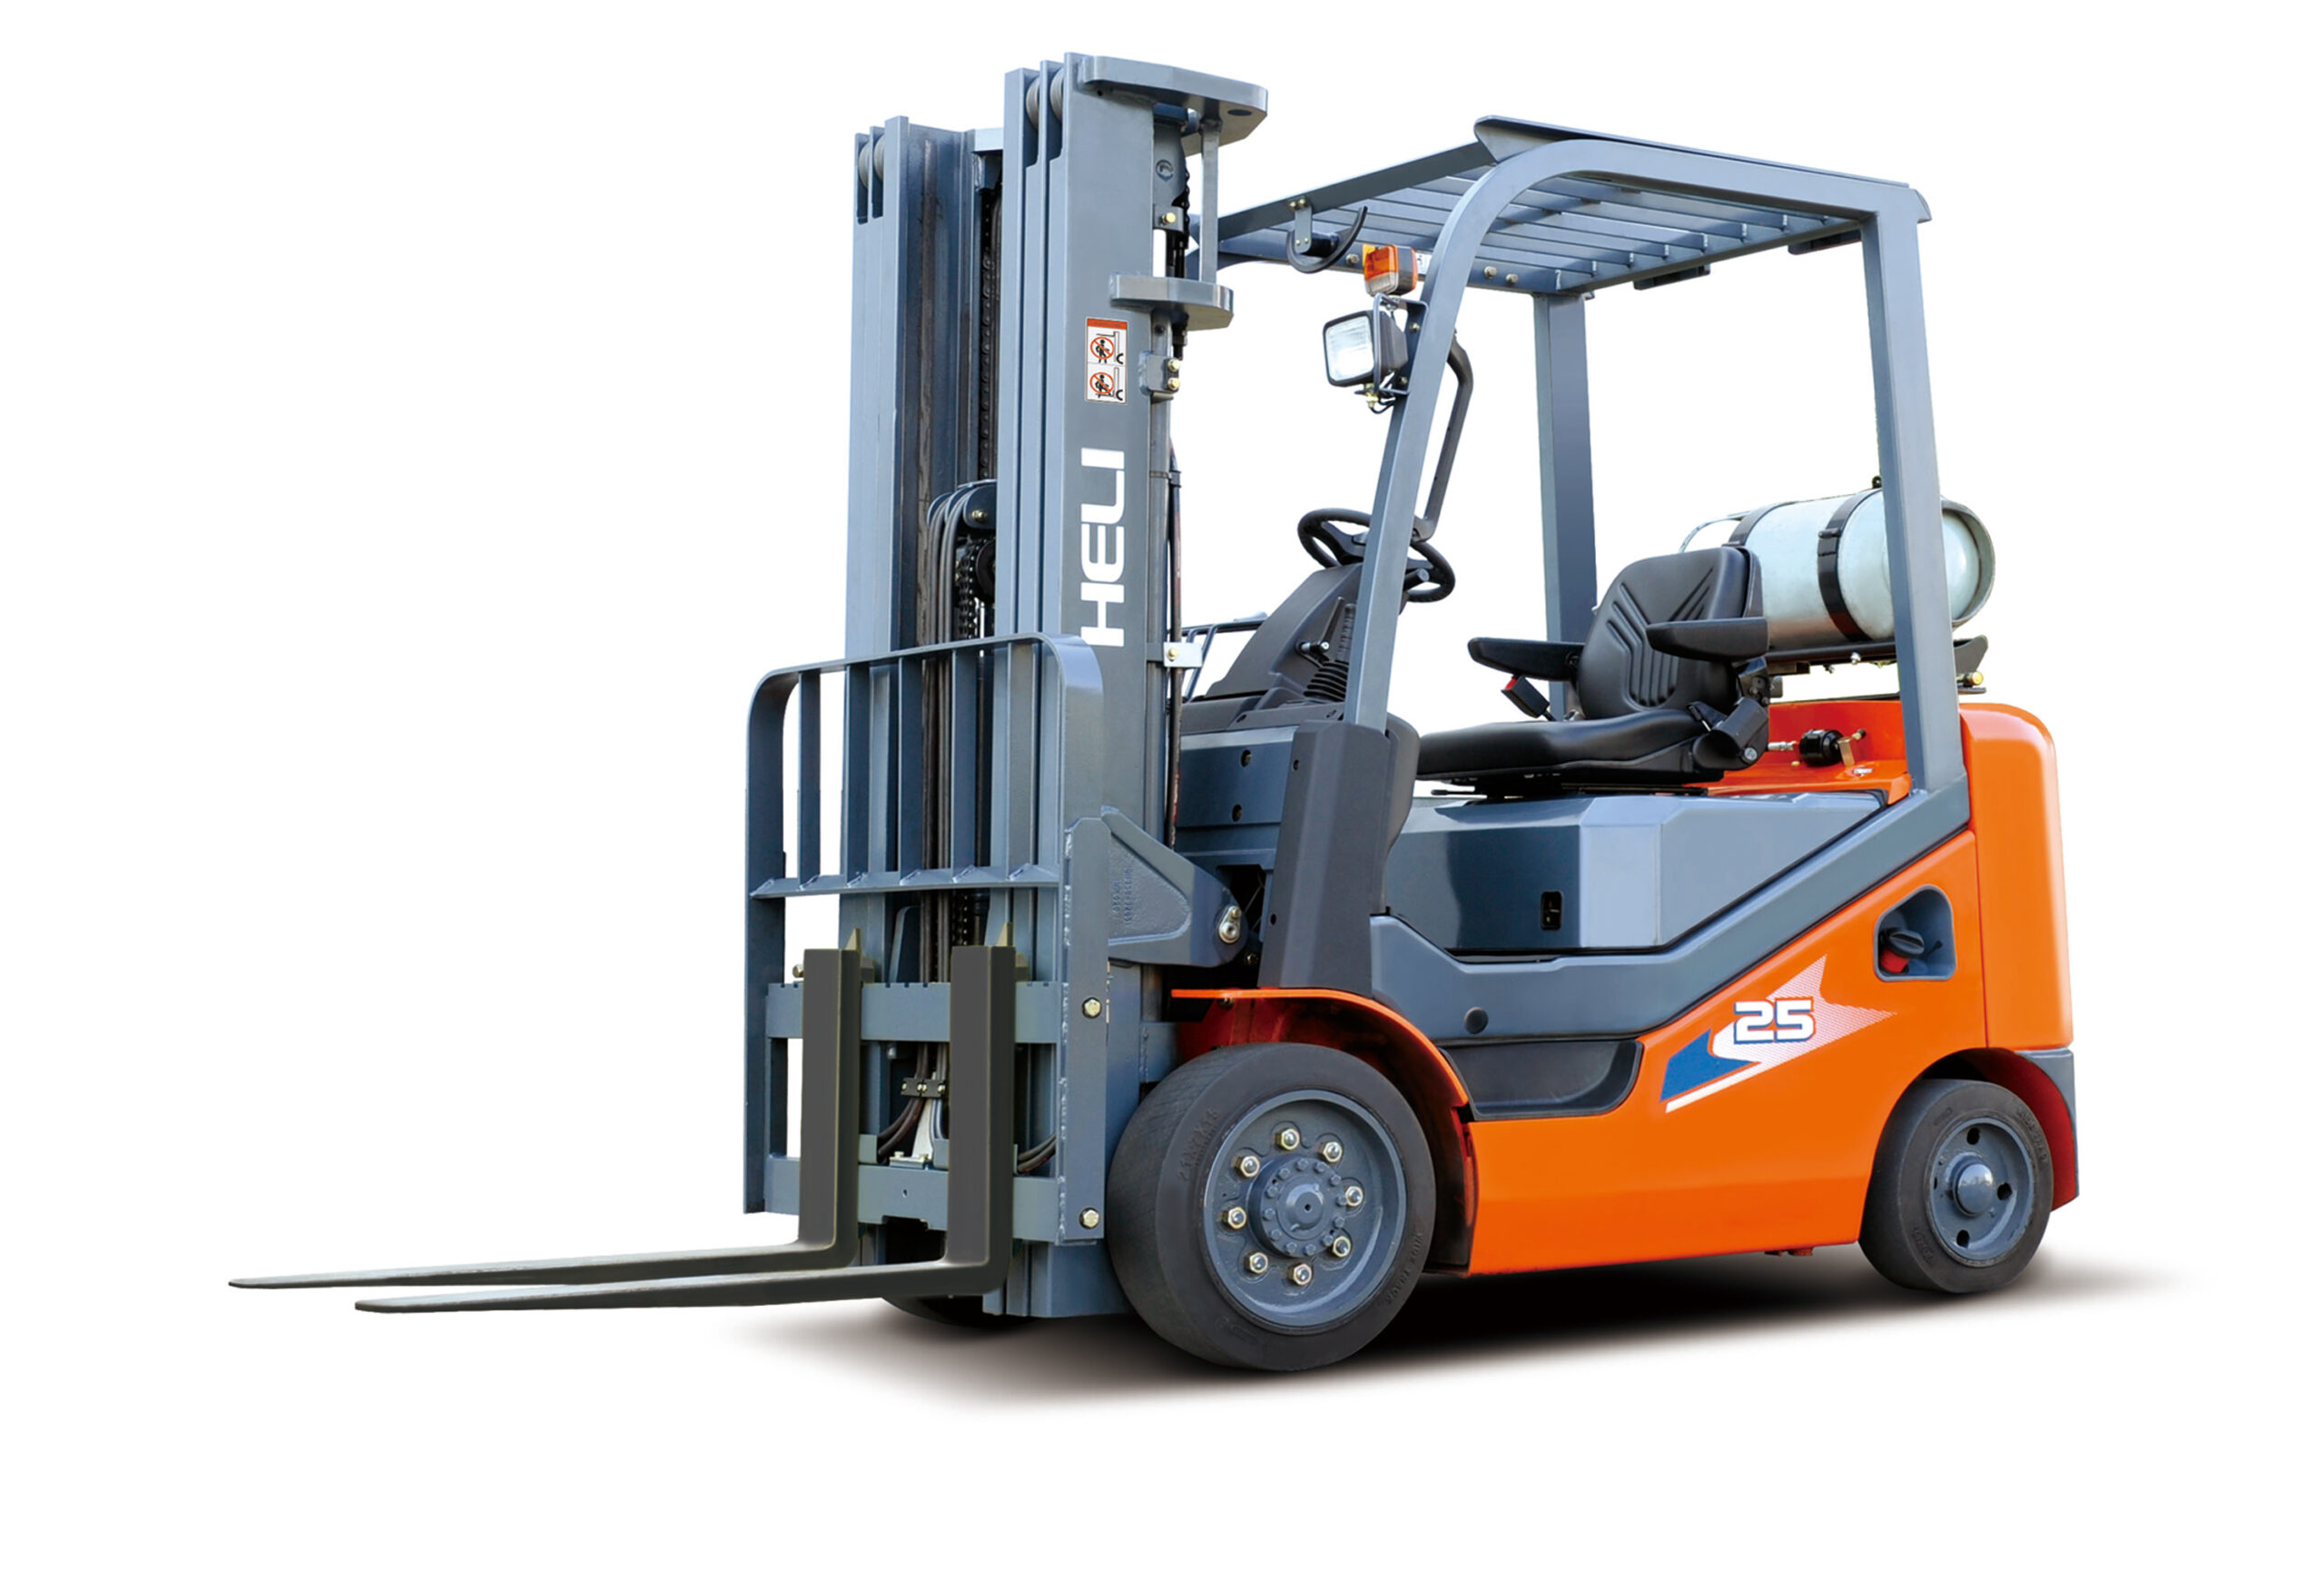 Get Tips for Buying a Heli Forklift